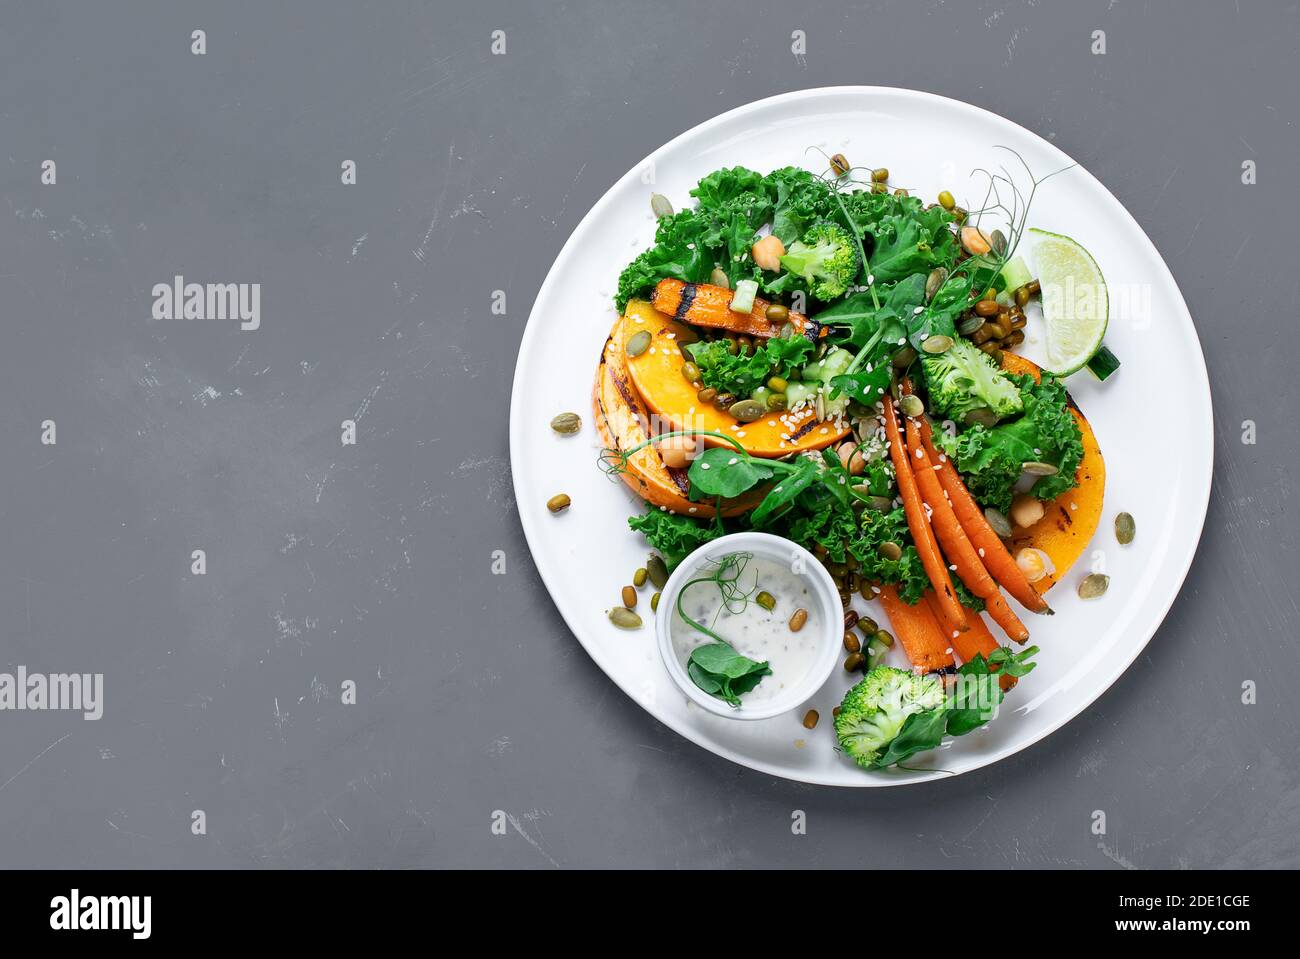 Grilled pumpkin salad with vegetables. Healthy vegan food. Top view, copy space Stock Photo